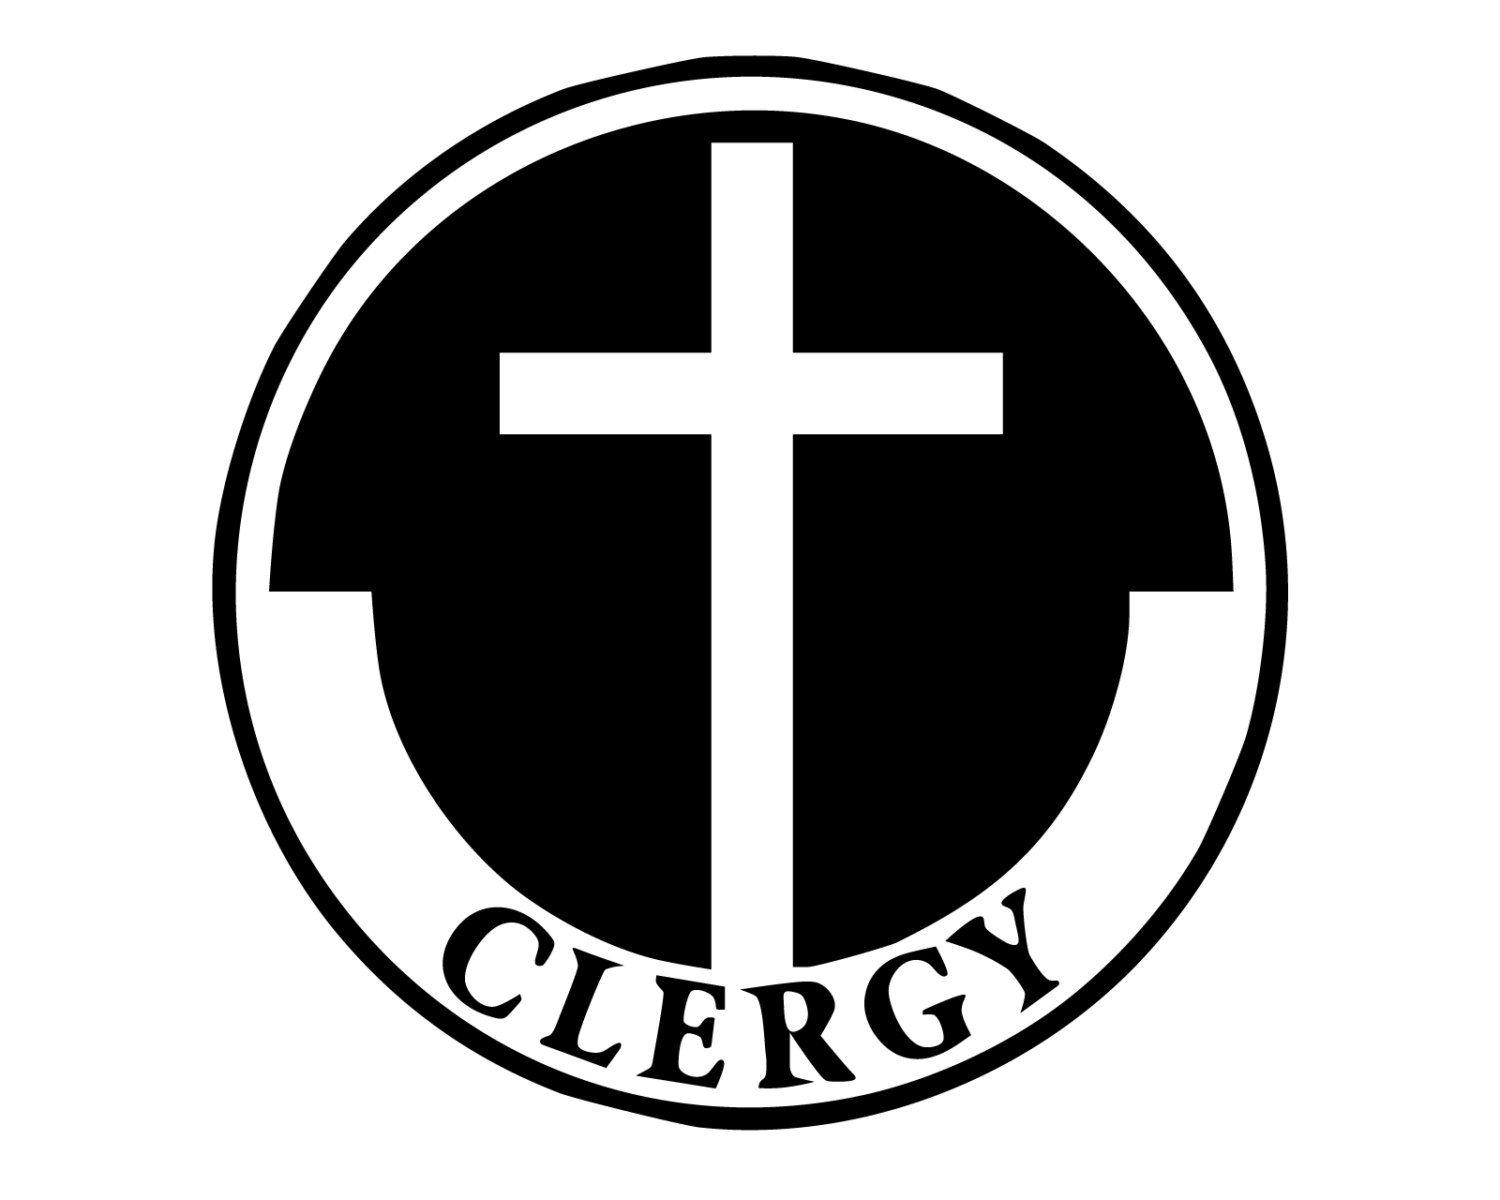 Clergy Logo - Clergy Decal Clergy Pastor Sticker Religious Clergy Cross | Etsy